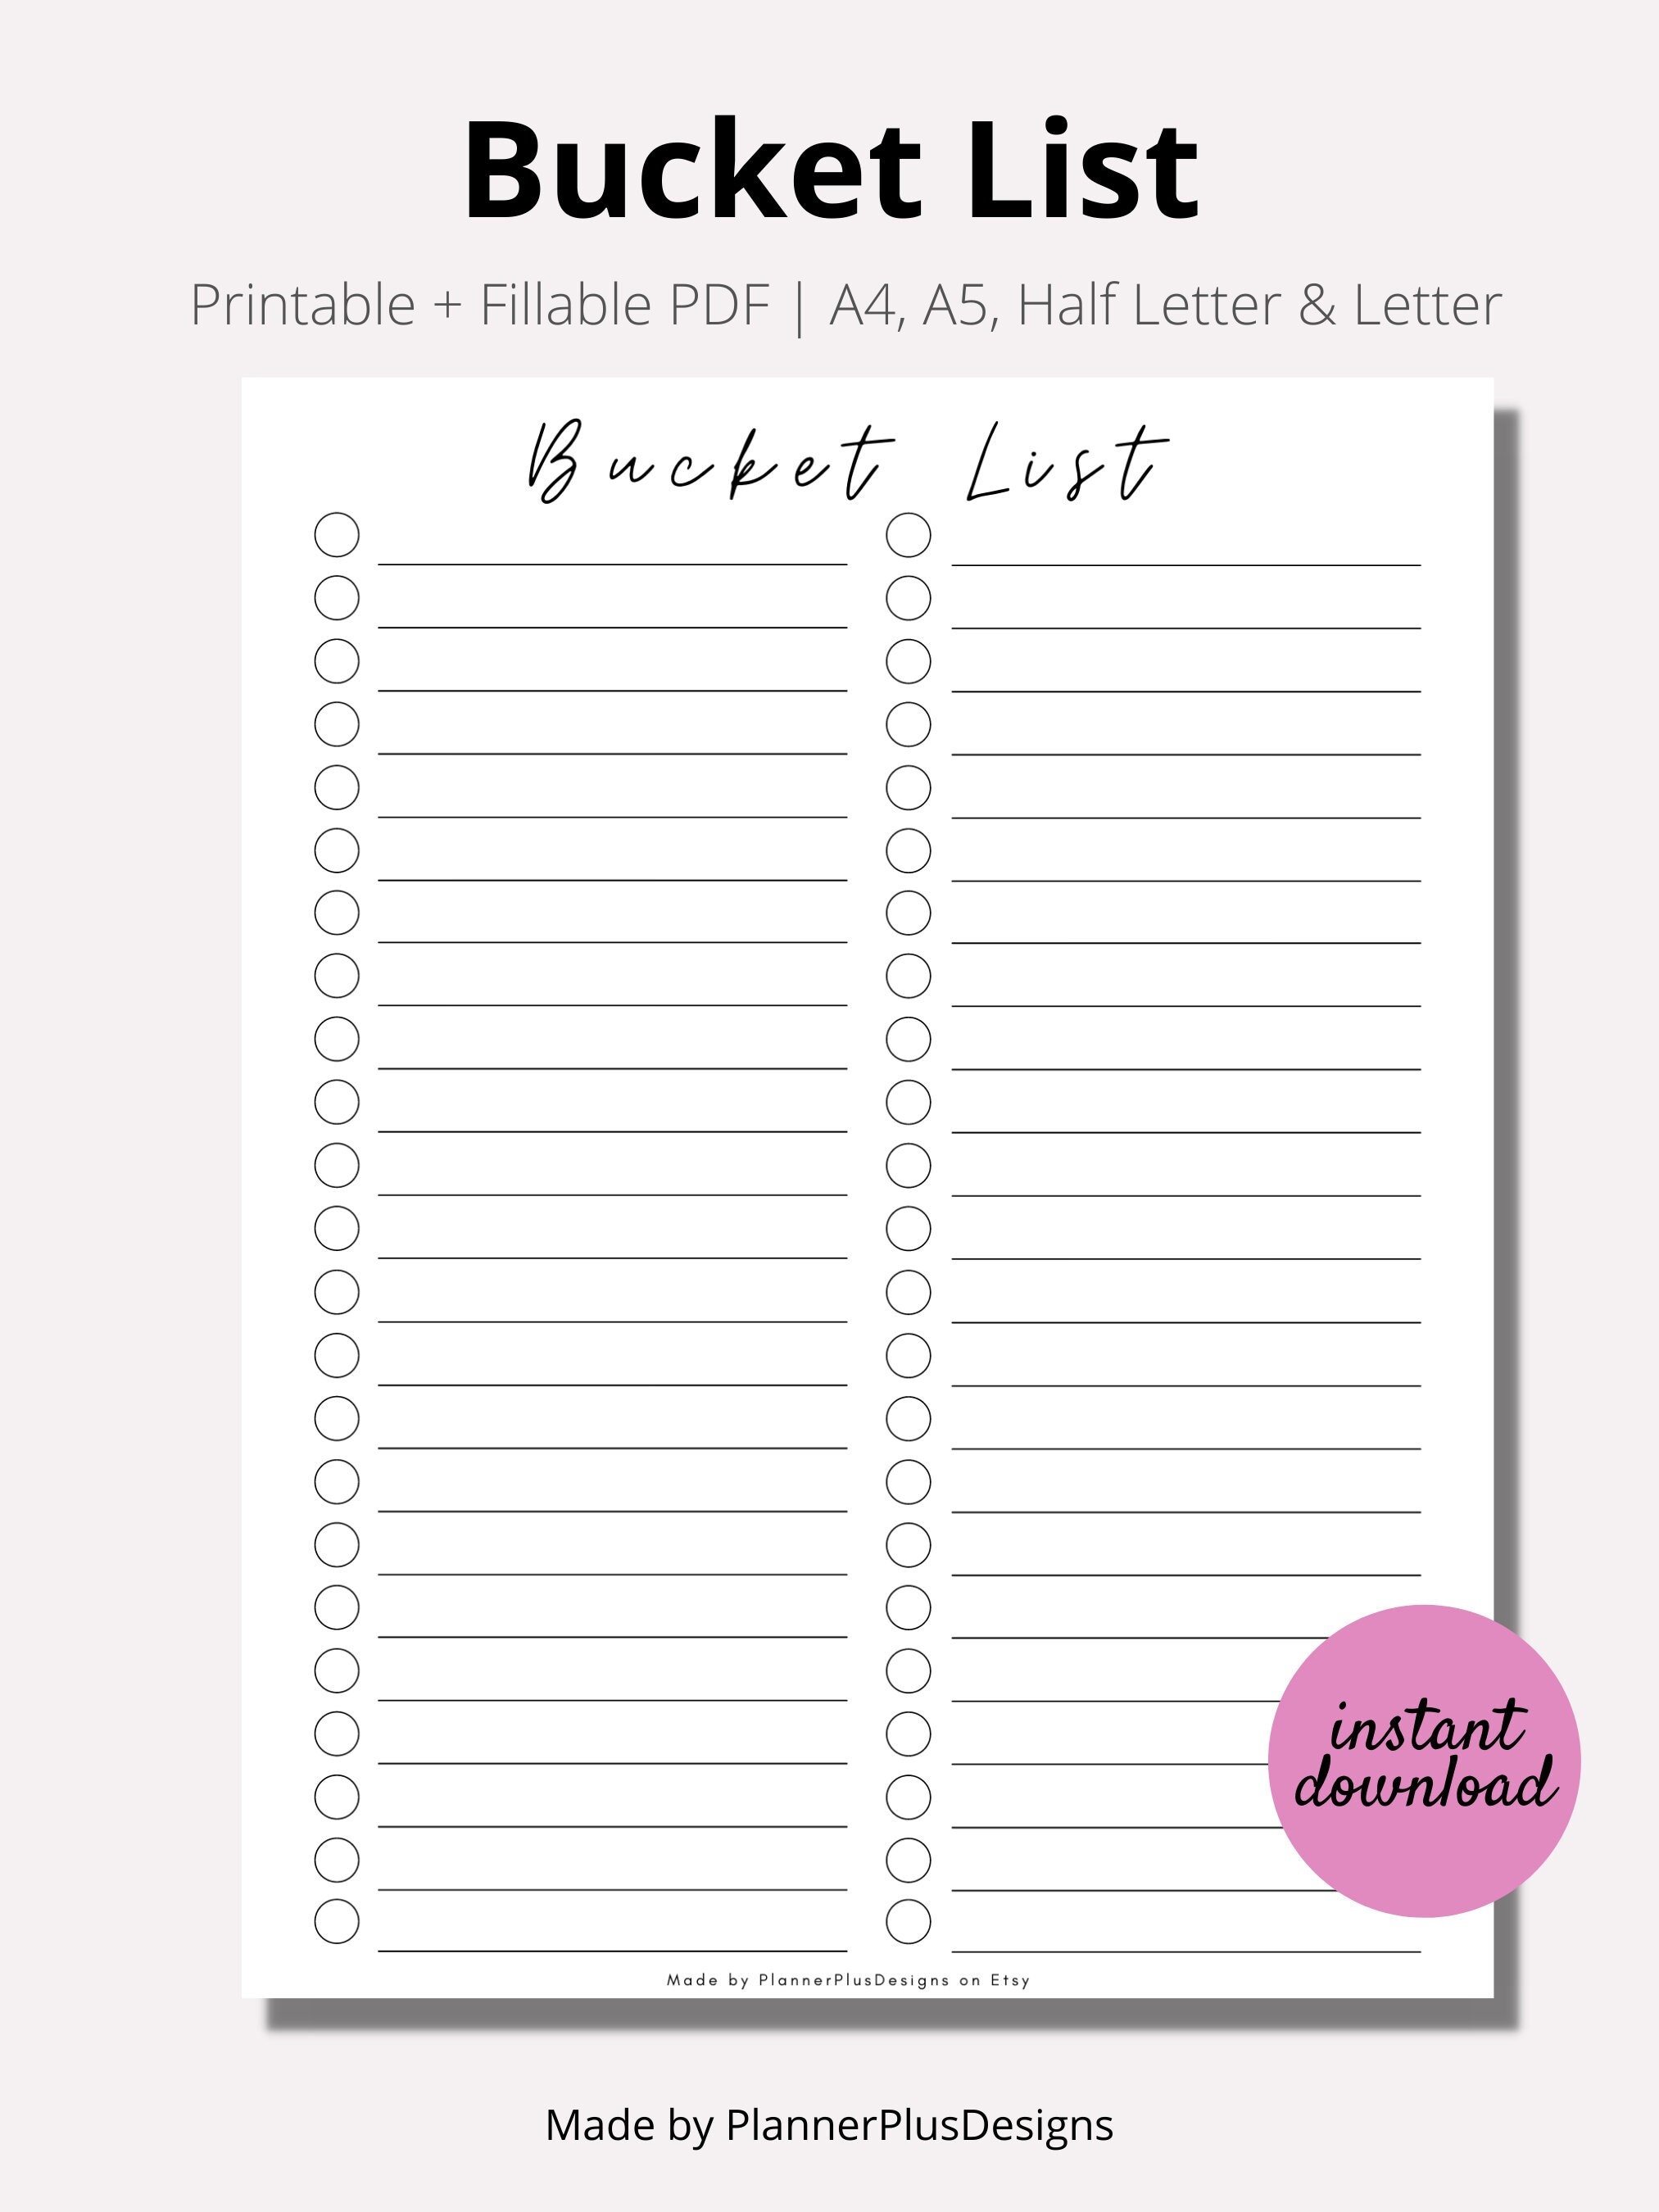 calendars-planners-paper-party-supplies-paper-simple-bucket-list